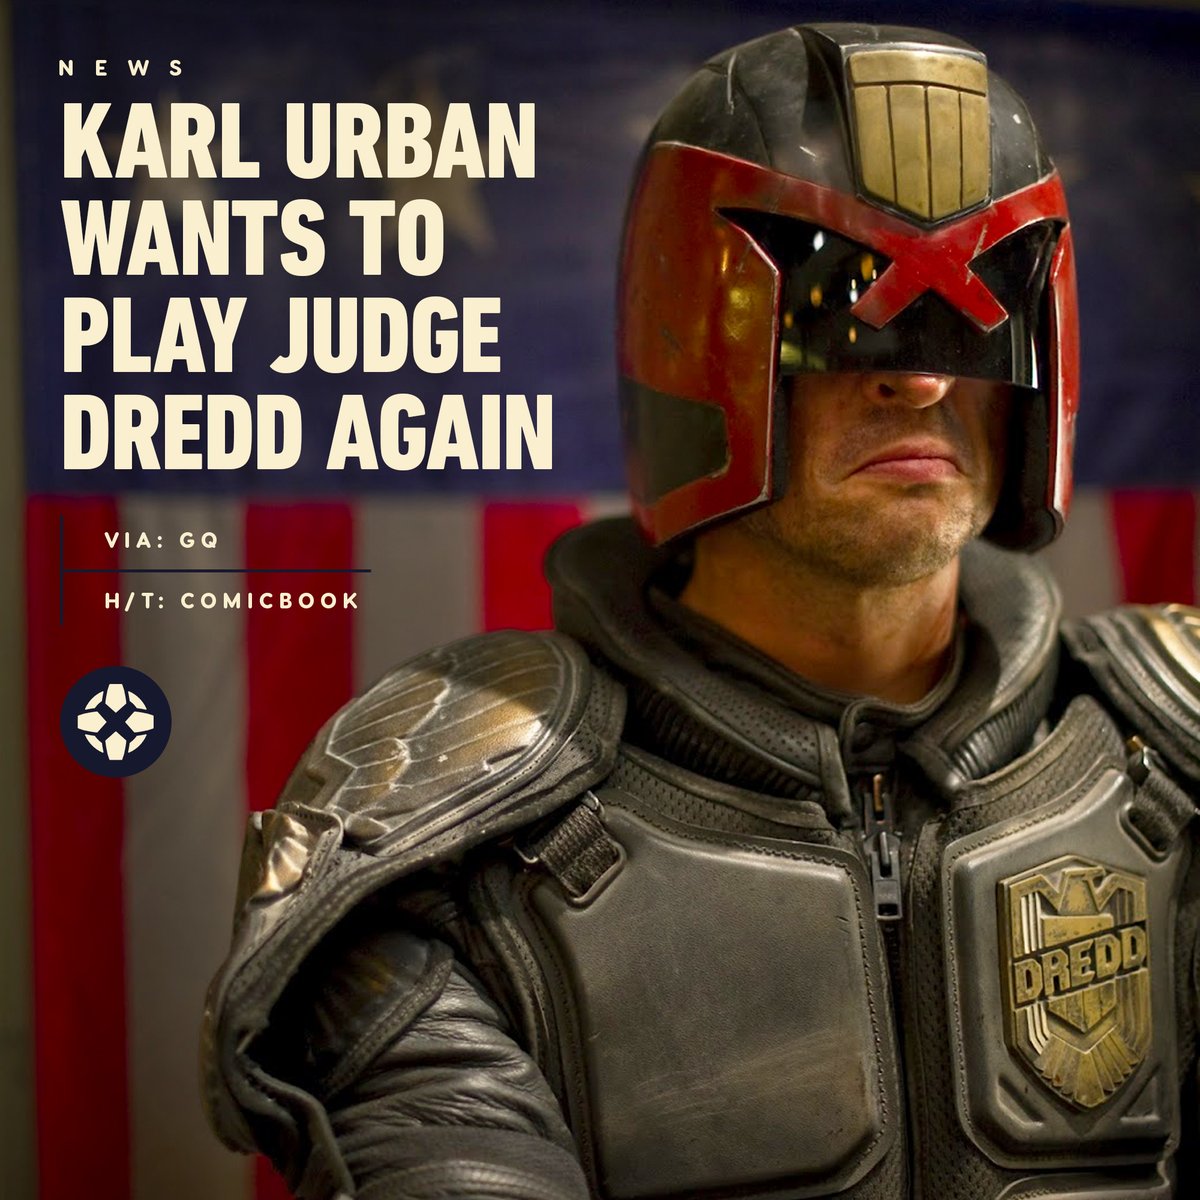 Karl Urban recently told GQ that he would play Judge Dredd again, if he could: “I certainly would be interested to revisit the character. There's such a great depth of material there….” bit.ly/3C4UndK